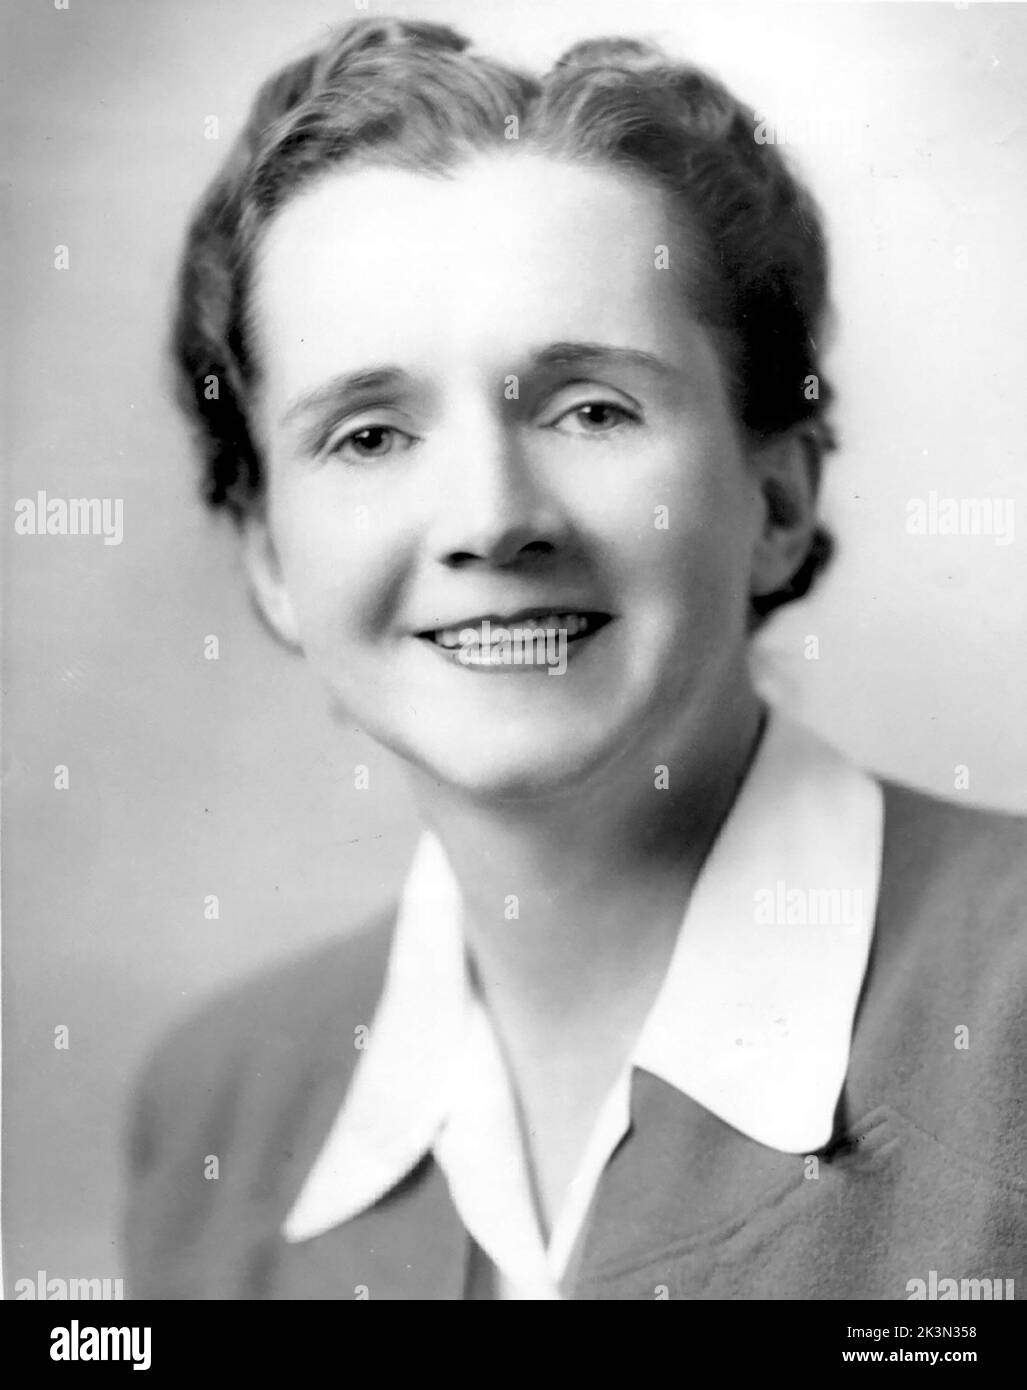 Rachel Louise Carson (May 27, 1907 – April 14, 1964) was an American marine biologist, writer, and conservationist whose influential book Silent Spring (1962) and other writings are credited with advancing the global environmental movement. Stock Photo